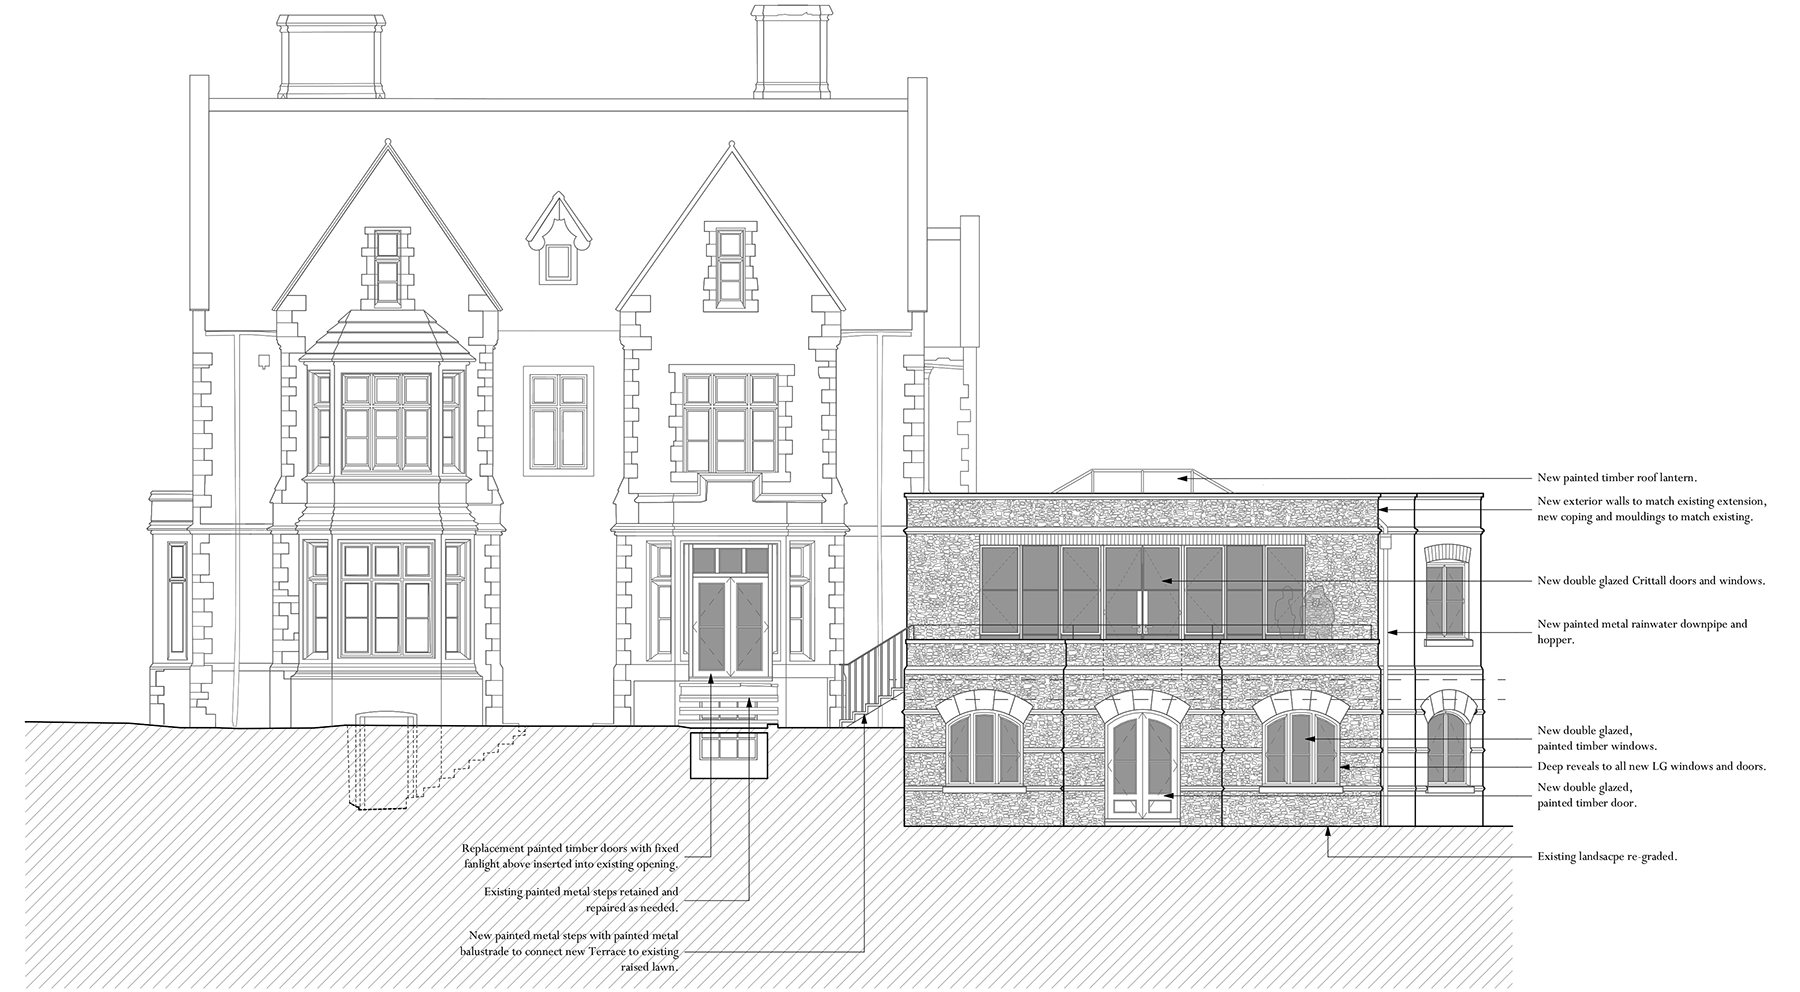 The prposed south elevation at The Old Vicarage, in Milborne Port. Picture: ADAM Architecture/Somerset Council